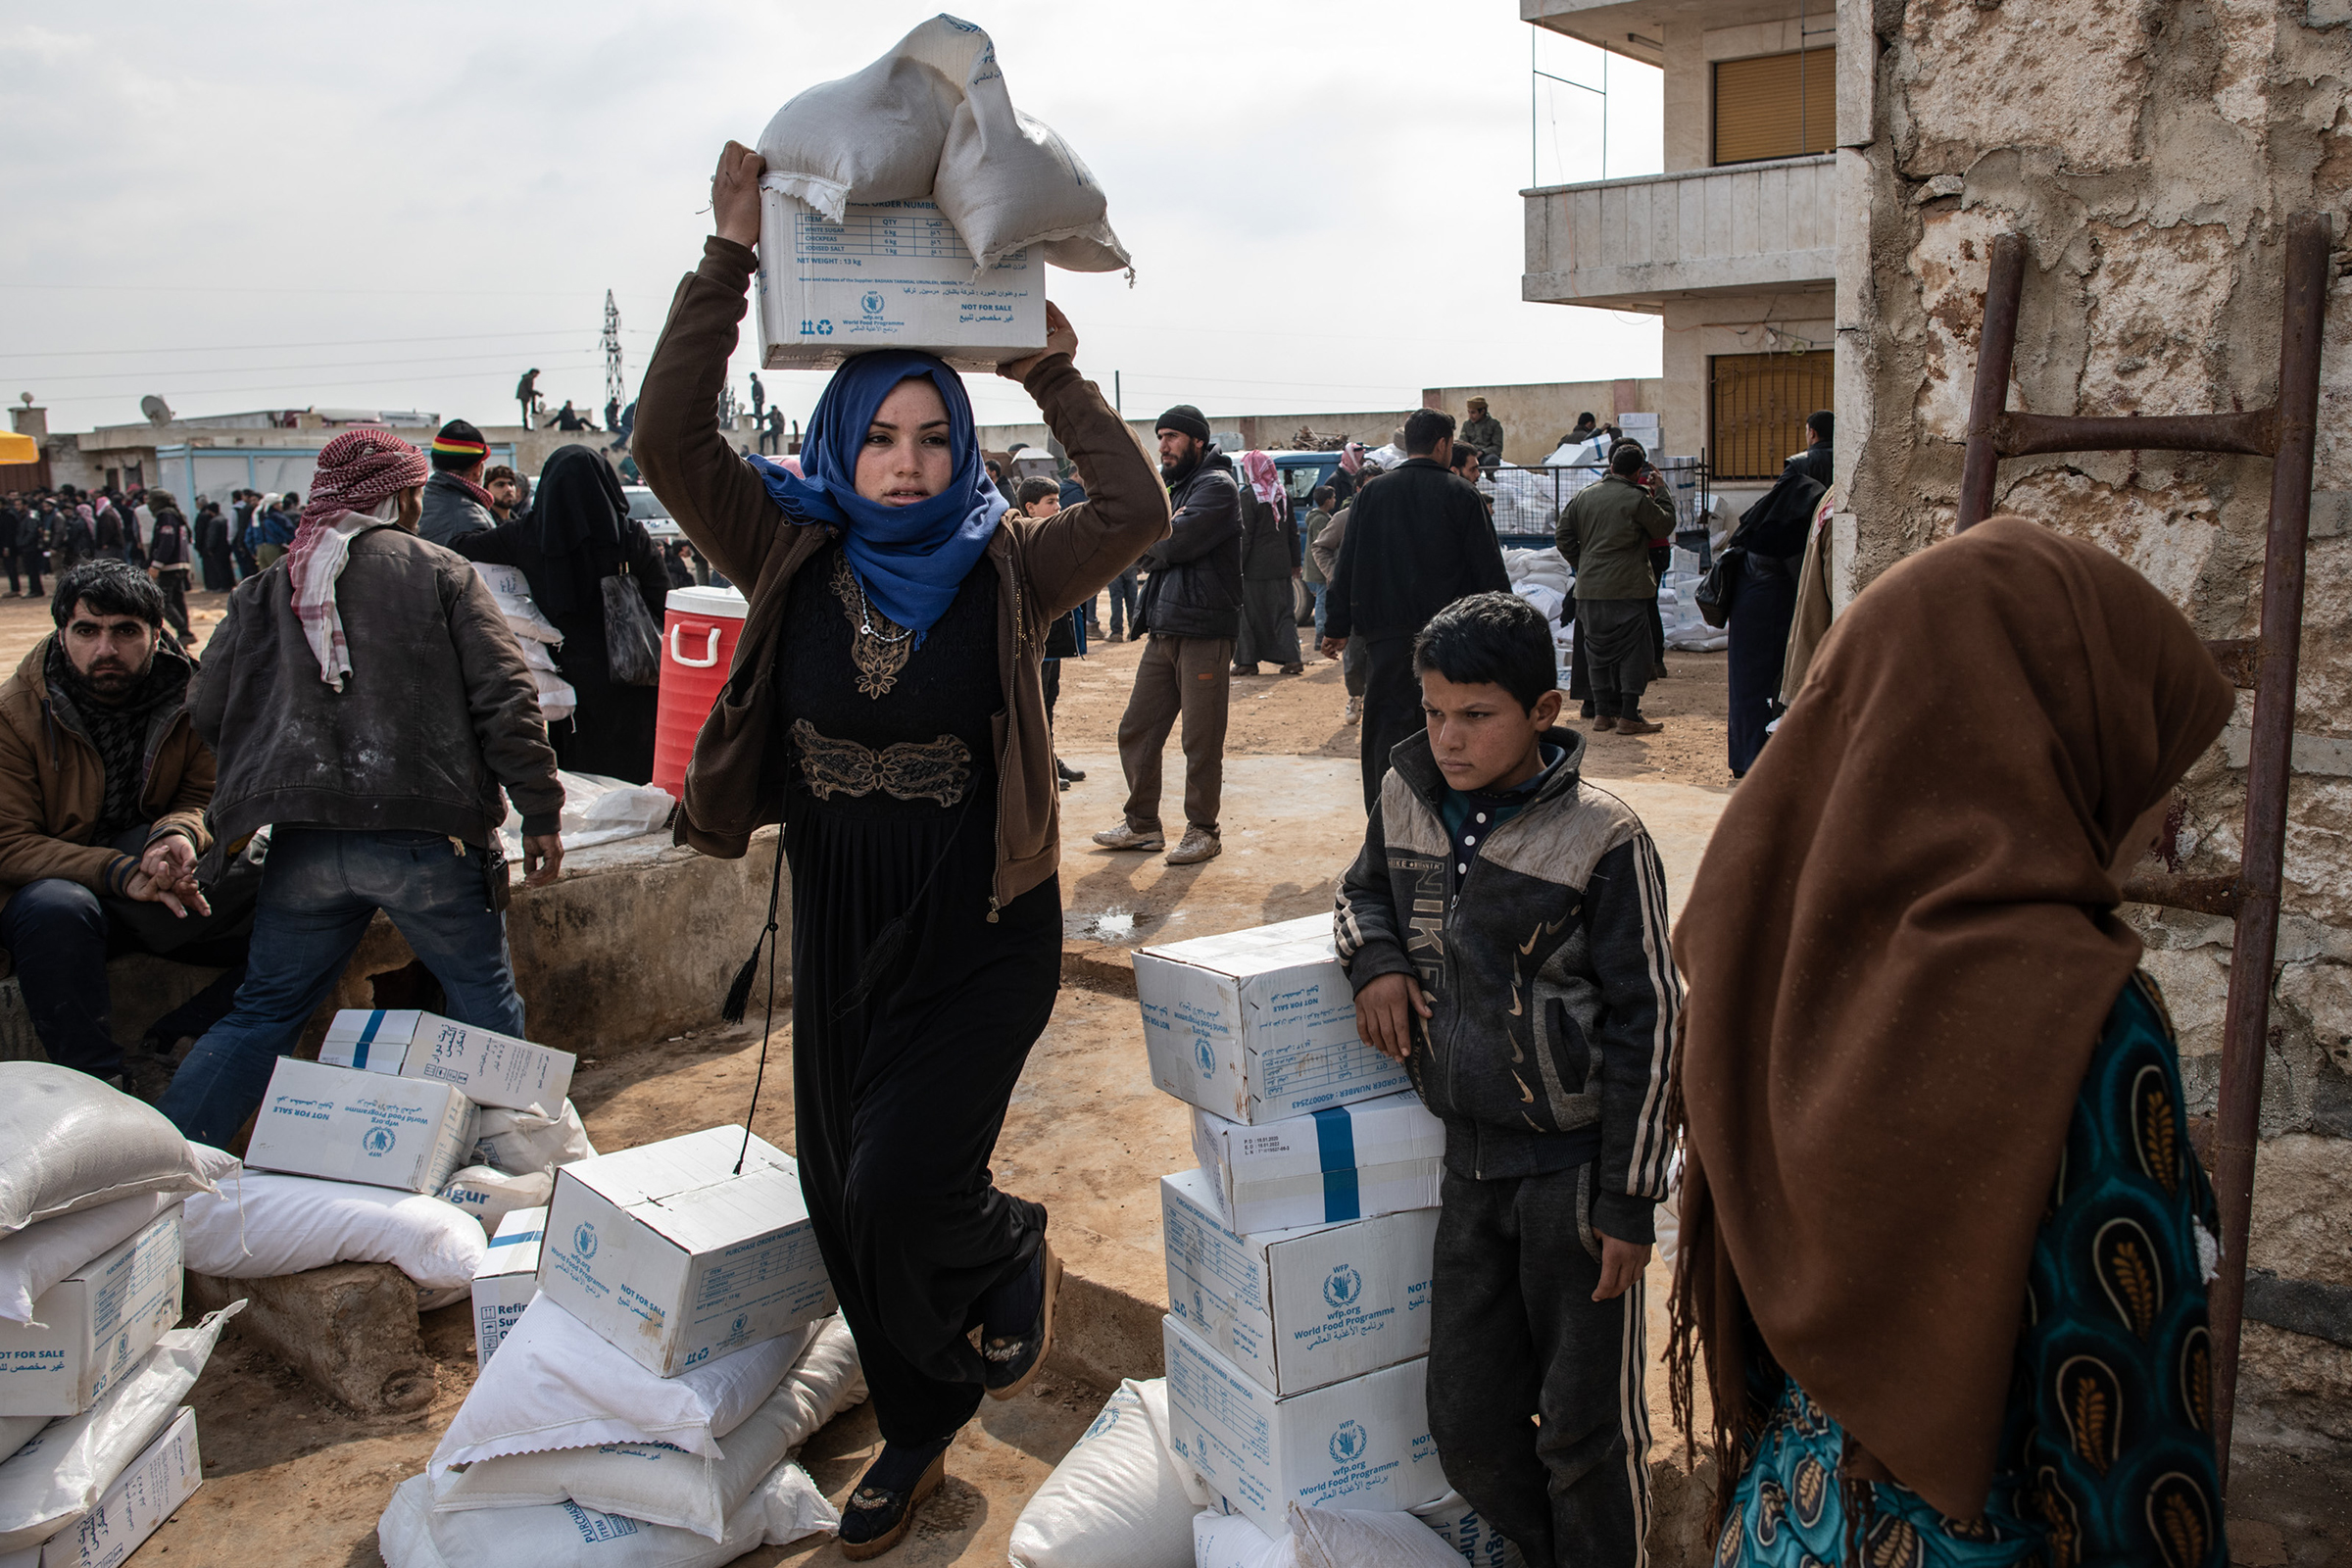 A displaced woman carries a box of humanitarian aid supplied by an NGO in Idlib, Syria, on Feb. 19, 2020. (Burak Kara—Getty Images)